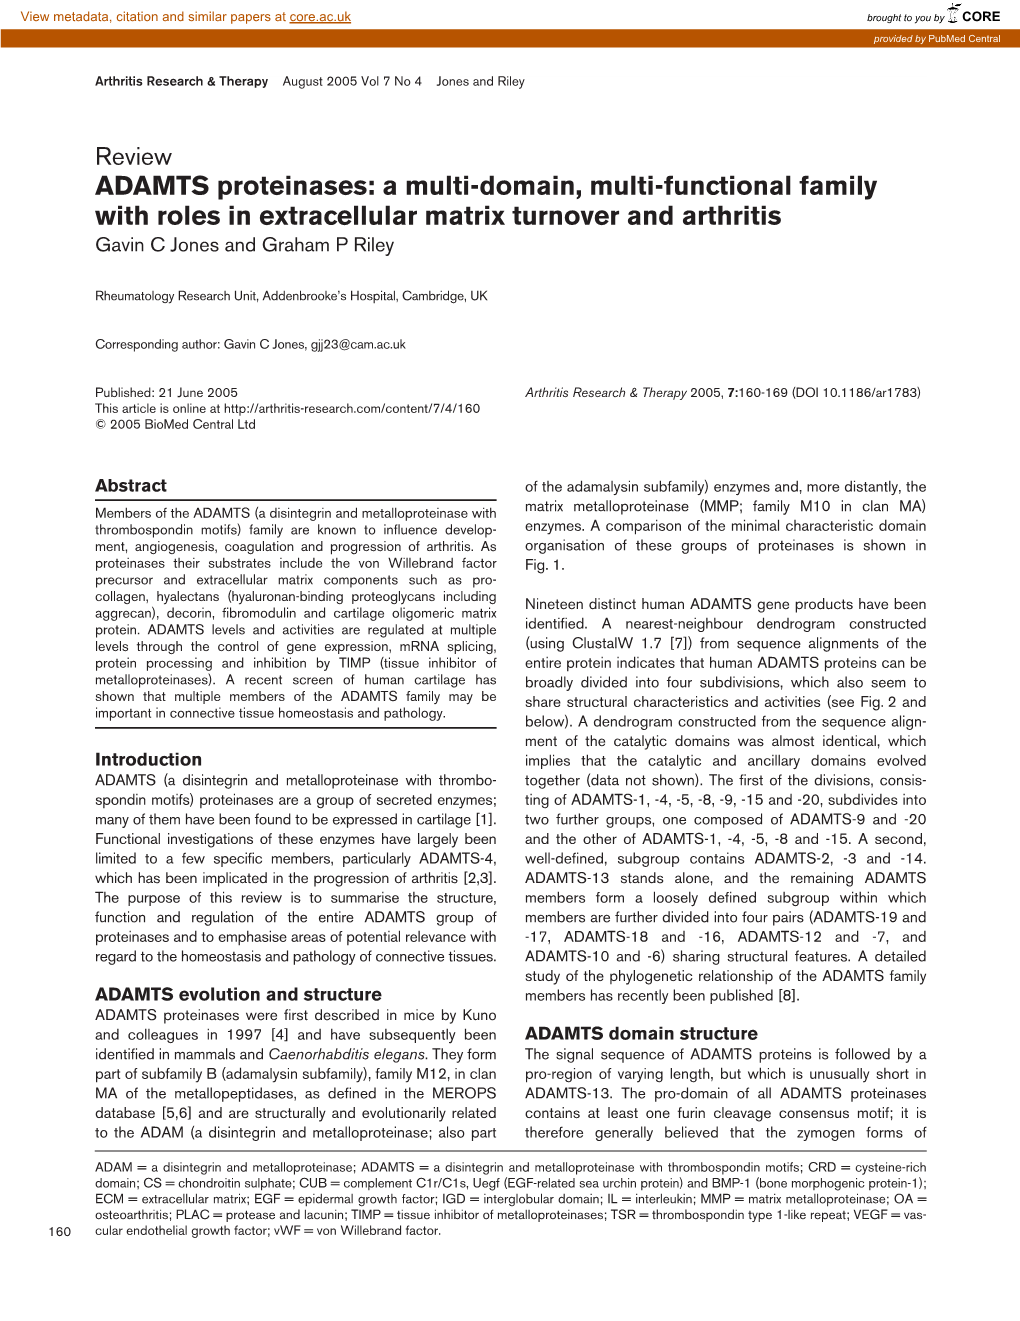 ADAMTS Proteinases: a Multi-Domain, Multi-Functional Family with Roles in Extracellular Matrix Turnover and Arthritis Gavin C Jones and Graham P Riley